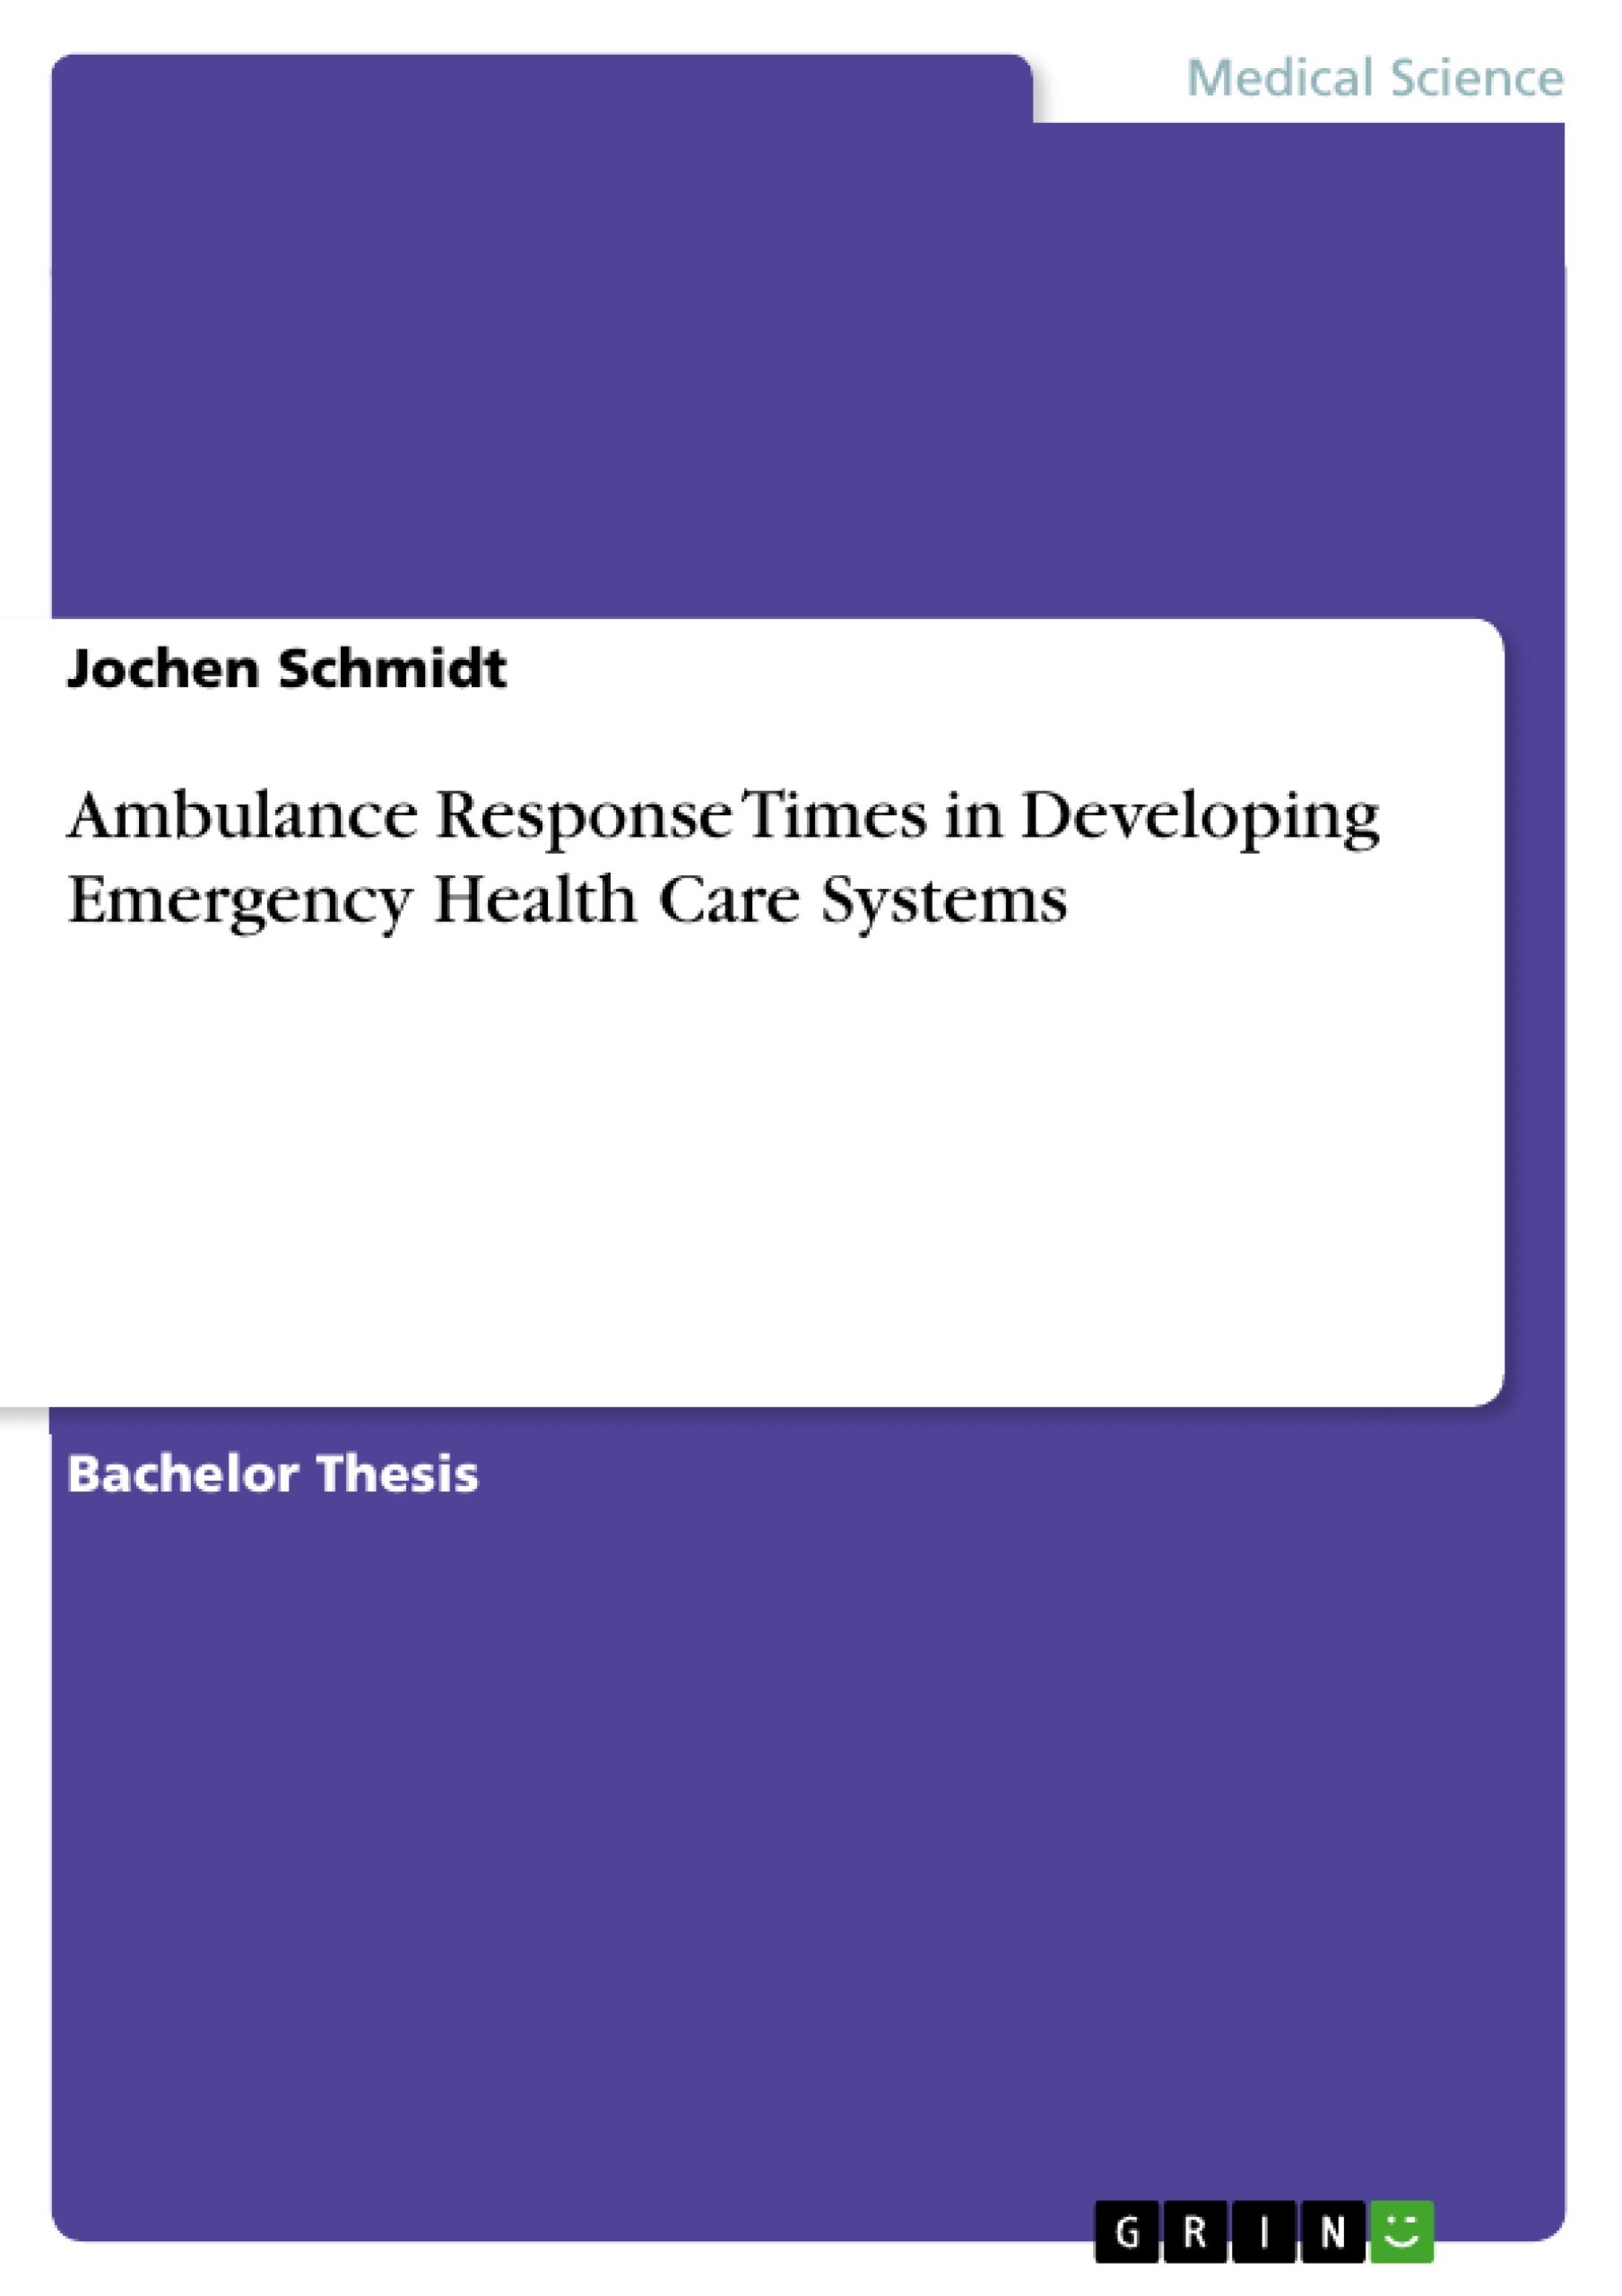 Ambulance Response Times in Developing Emergency Health Care Systems